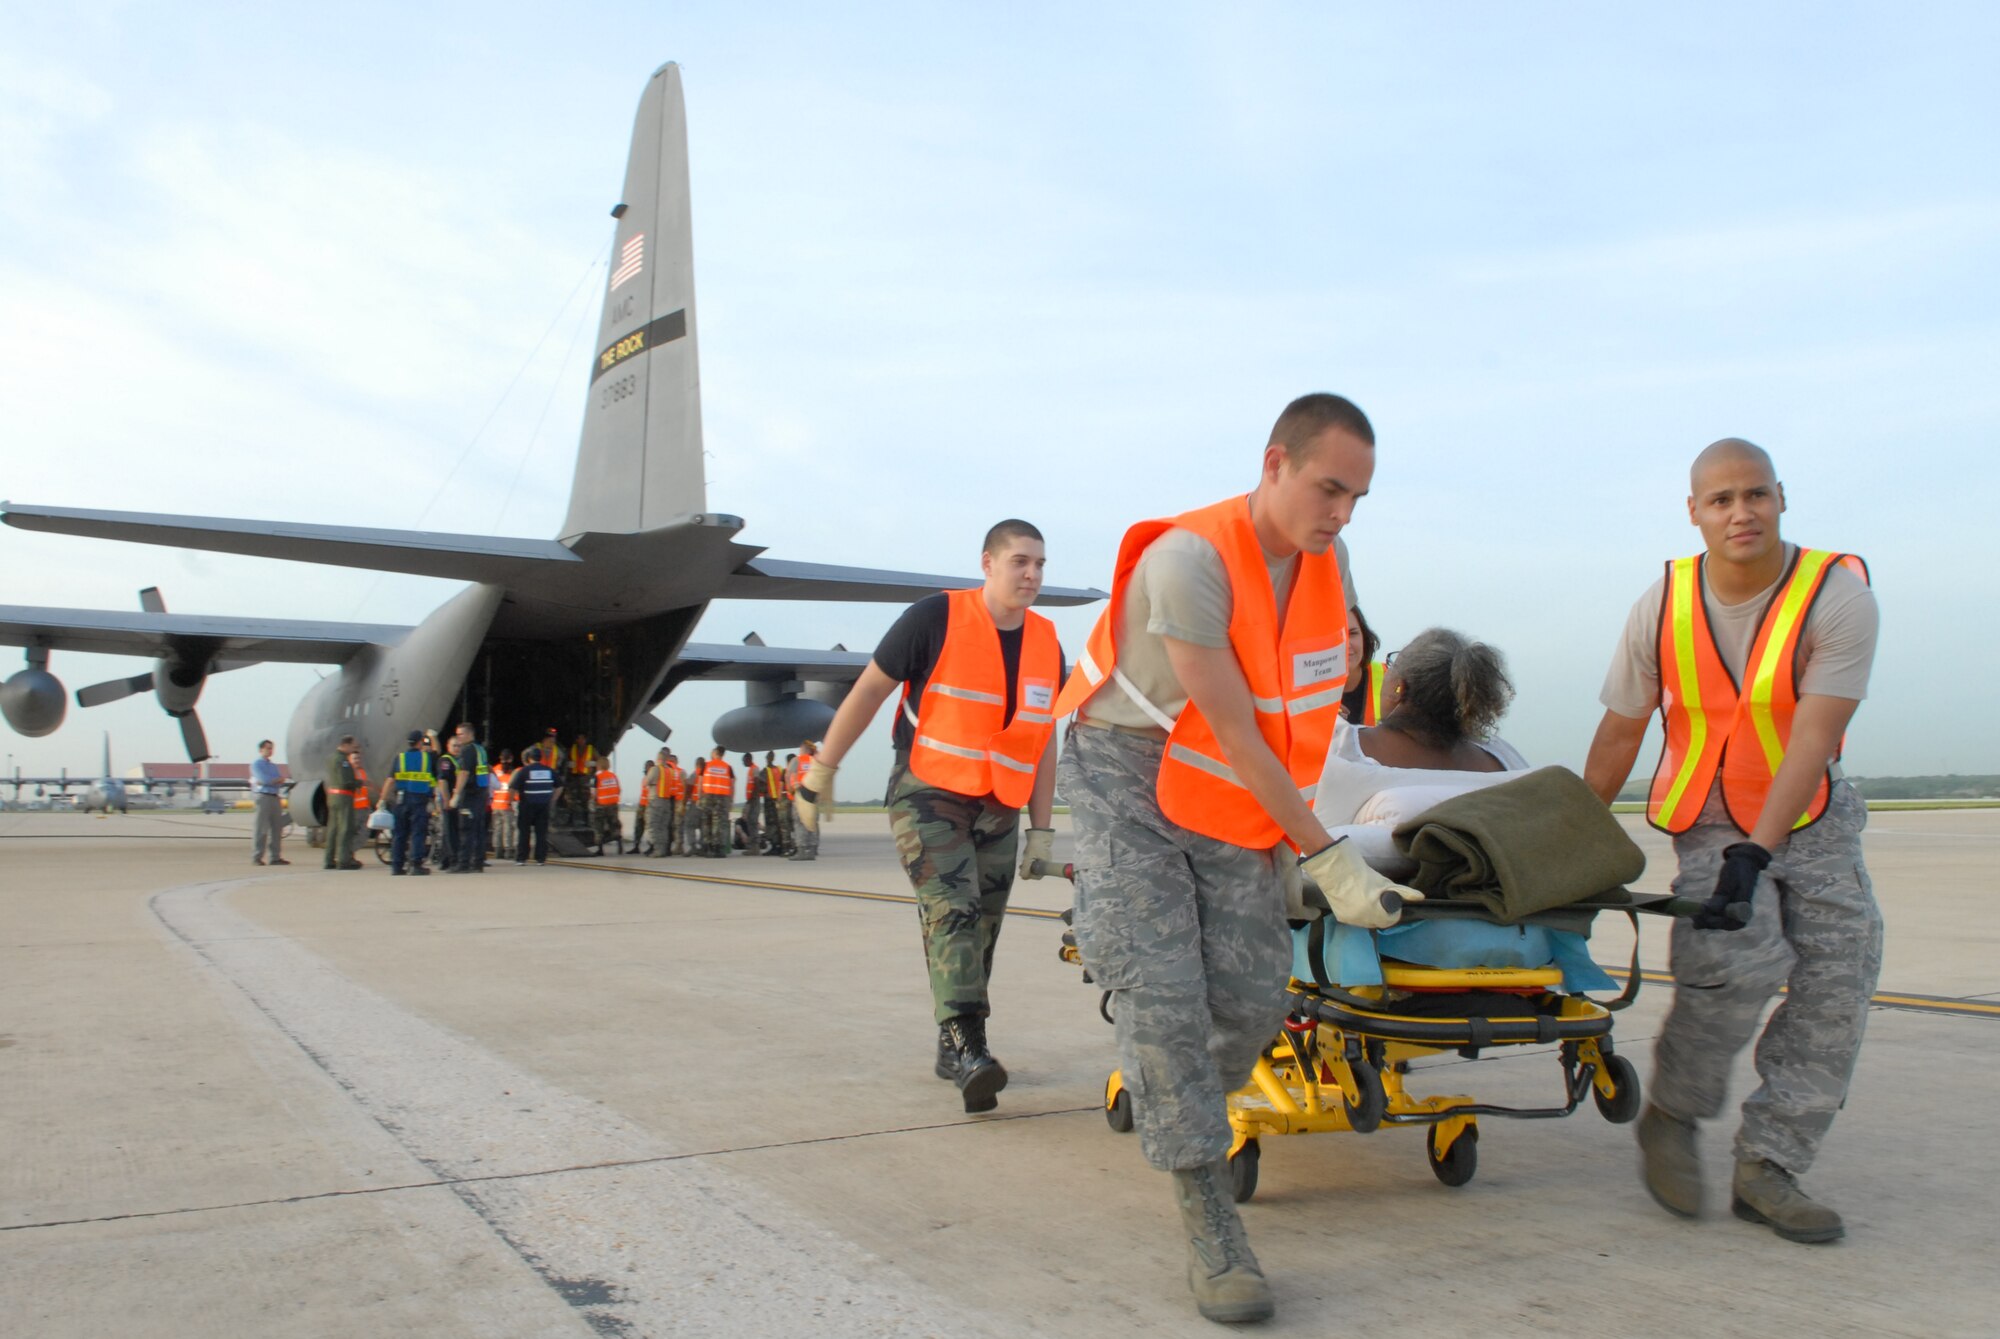 LACKLAND AIR FORCE BASE, Texas -- U.S. Air Force Airmen from the 37th and 59th Air Wing unload hospital patients that were evacuated from Beaumont, Texas, September 12, 2008. These patients were transported by a combined effort from the Little Rock Air Force Base C-130 aircraft and crews and the 908th Aero medical Evacuation Squadron, Scott Air Force Base, IL in preparation for Hurricane Ike's landfall in southern Texas.  (U.S. Air Force photo by Staff Sgt. Chris Willis) (RELEASED)